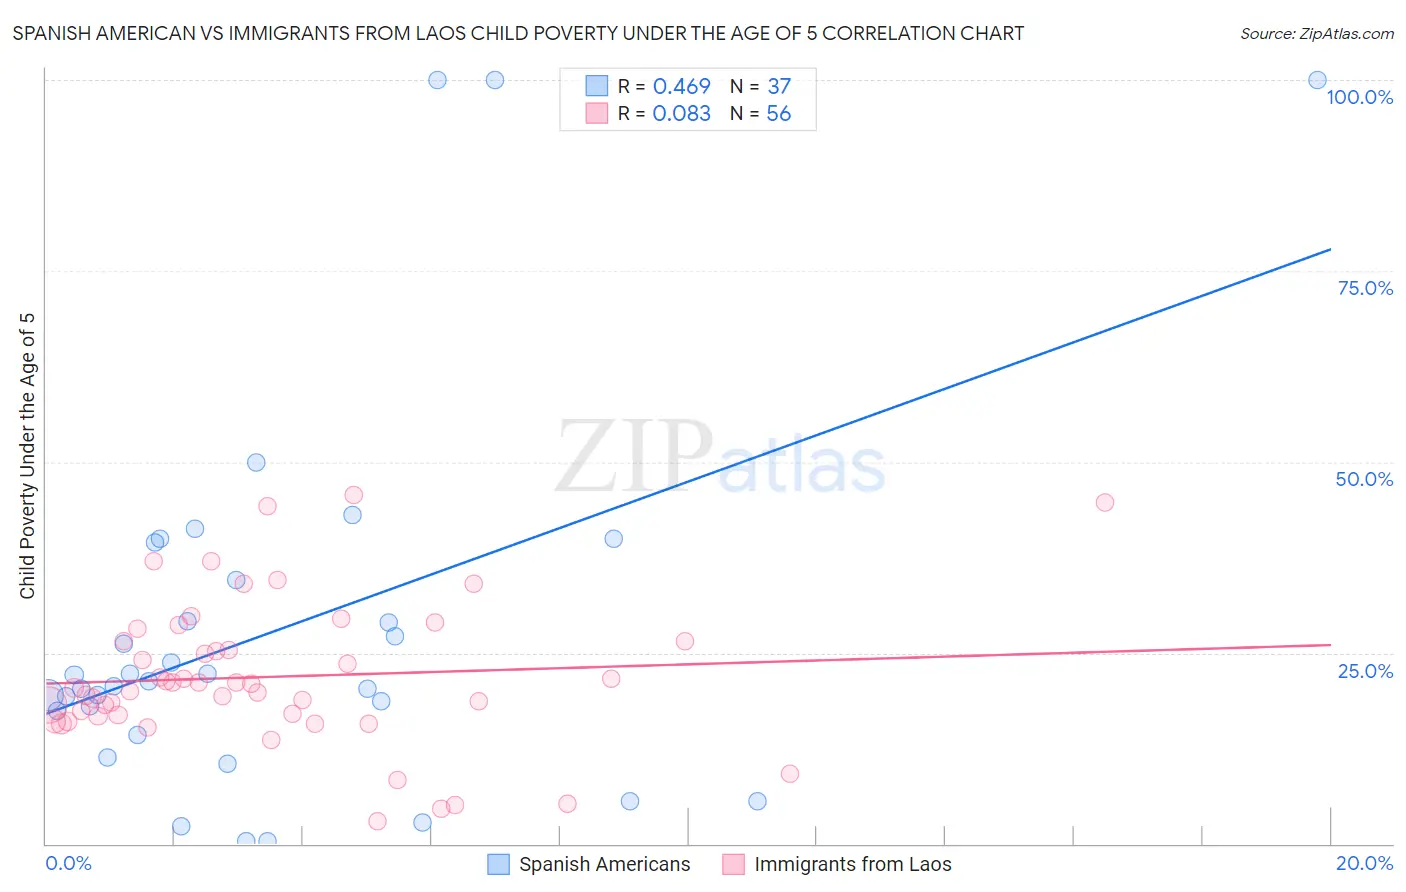 Spanish American vs Immigrants from Laos Child Poverty Under the Age of 5